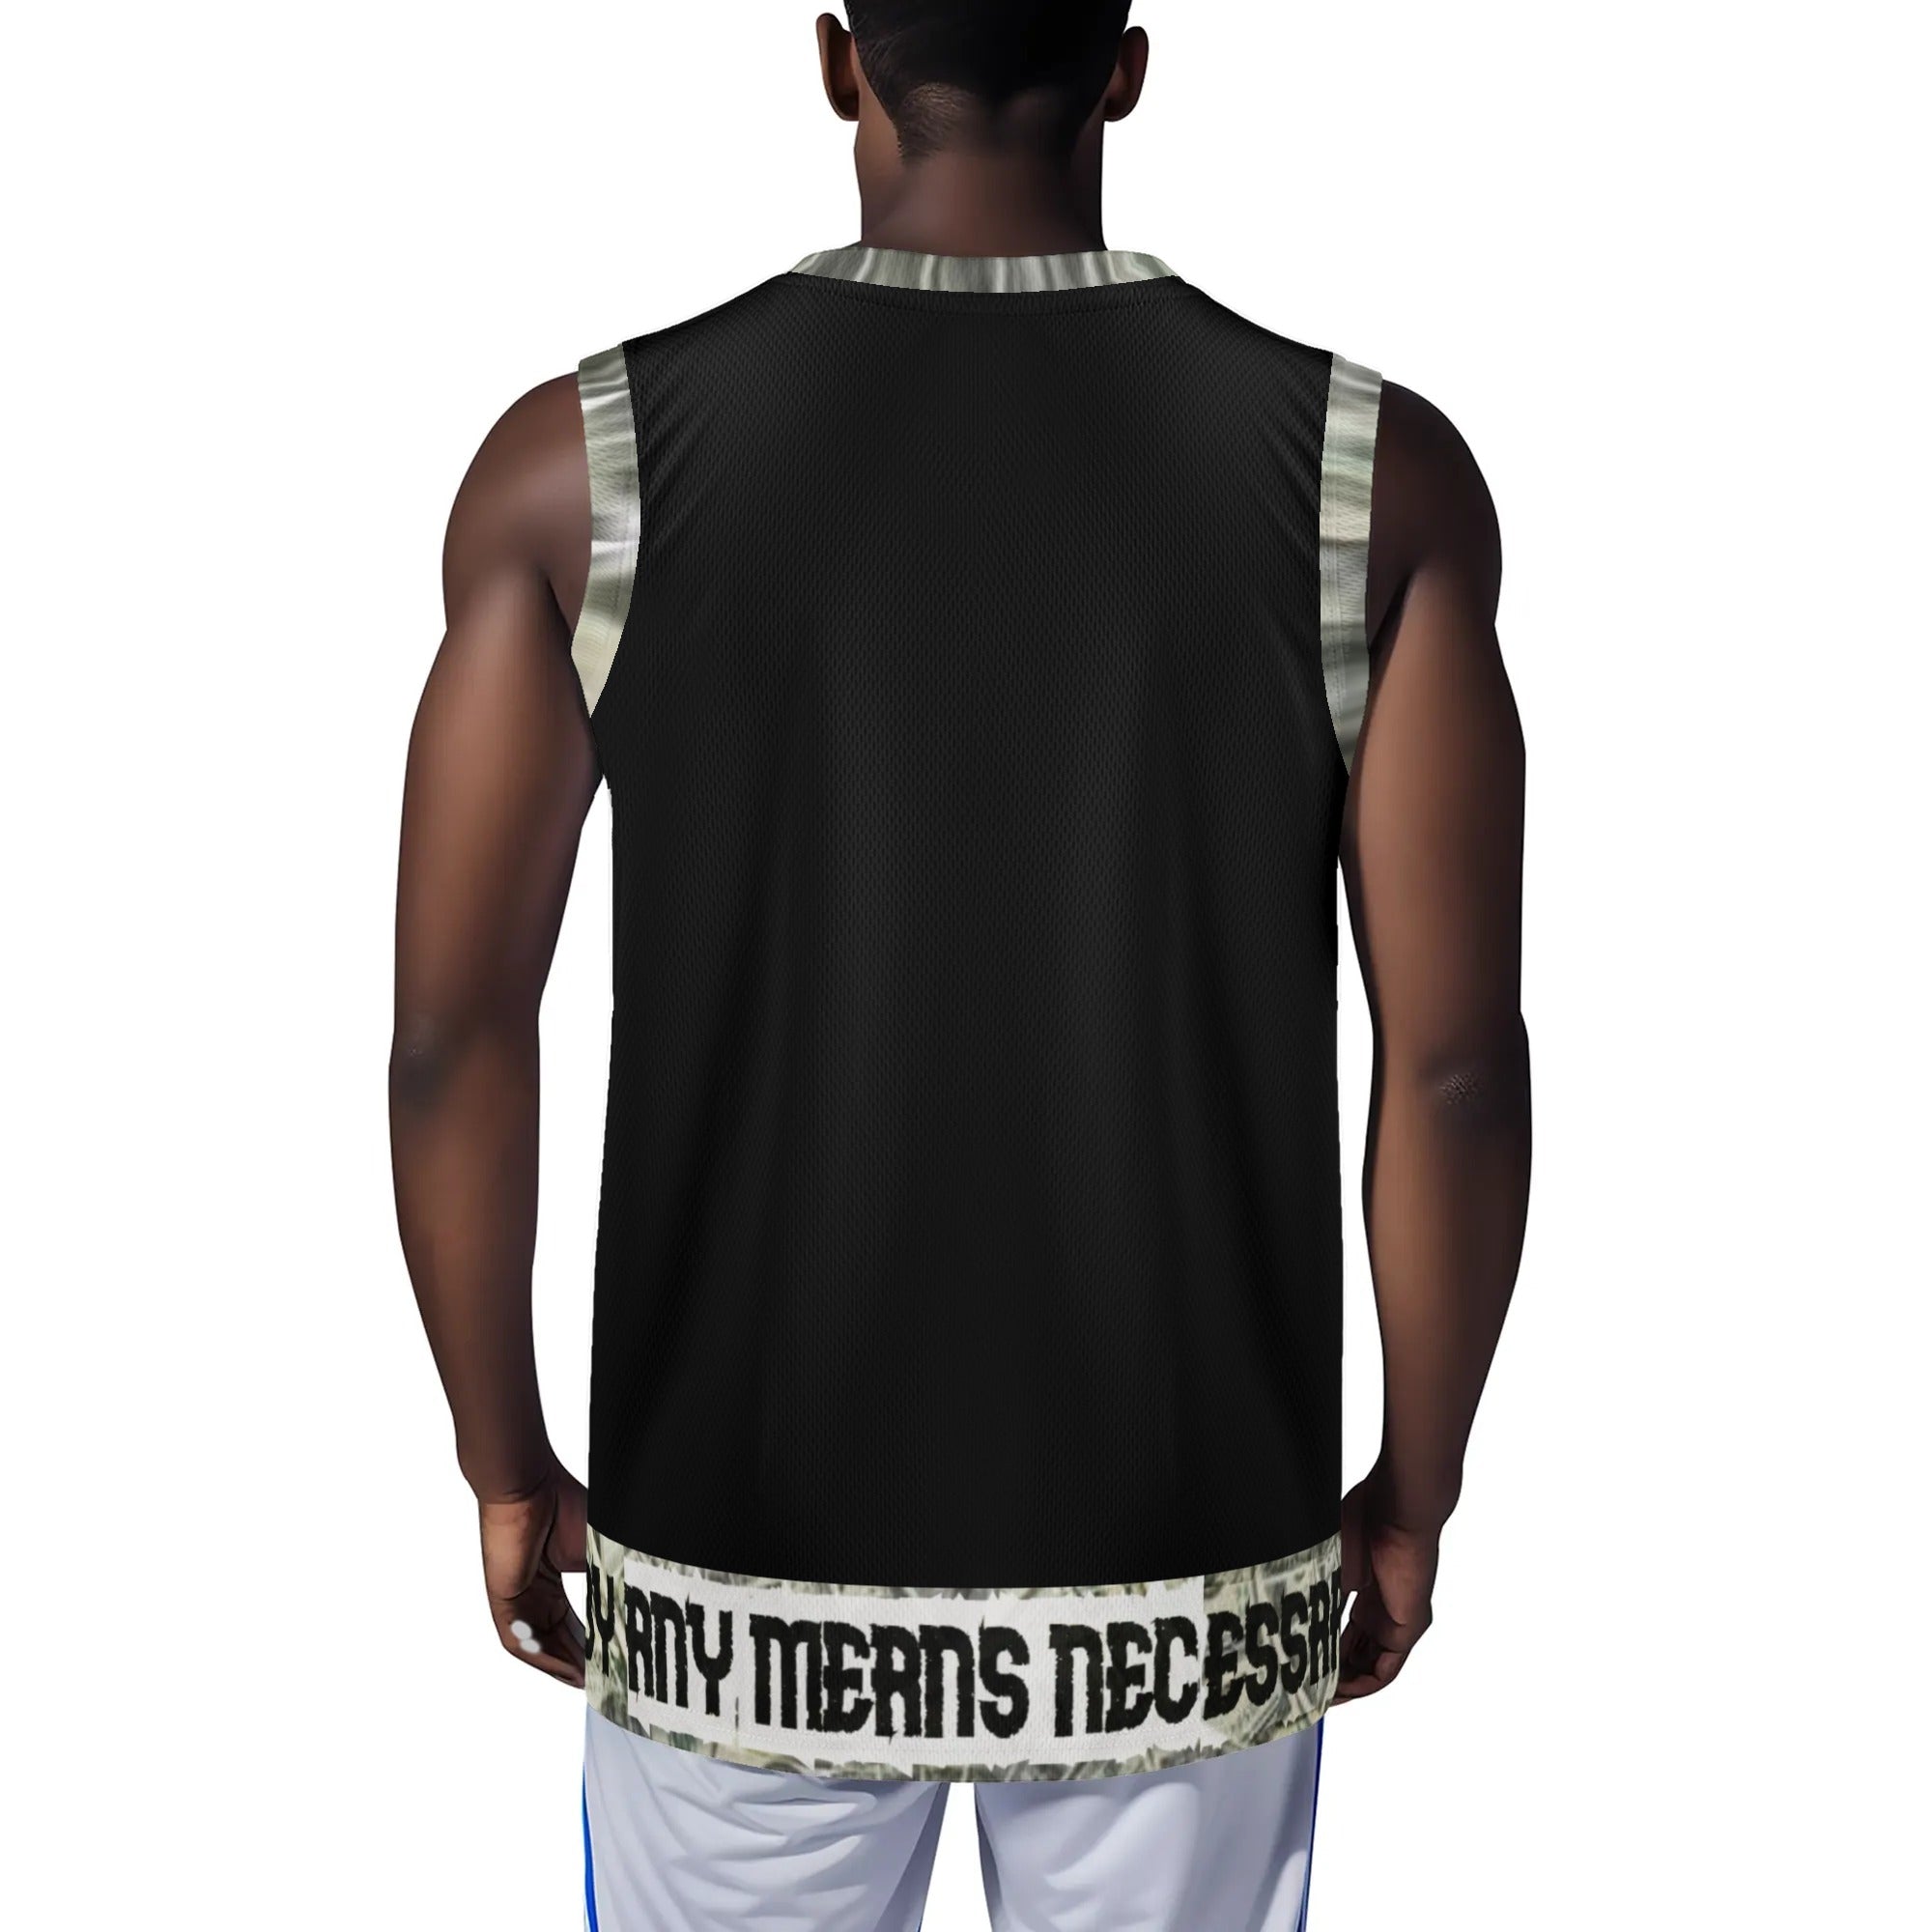 - B.A.M.N- By Any Means Necessary X Men's Basketball Jerseys Tank Top Black - mens basketball jersey at TFC&H Co.